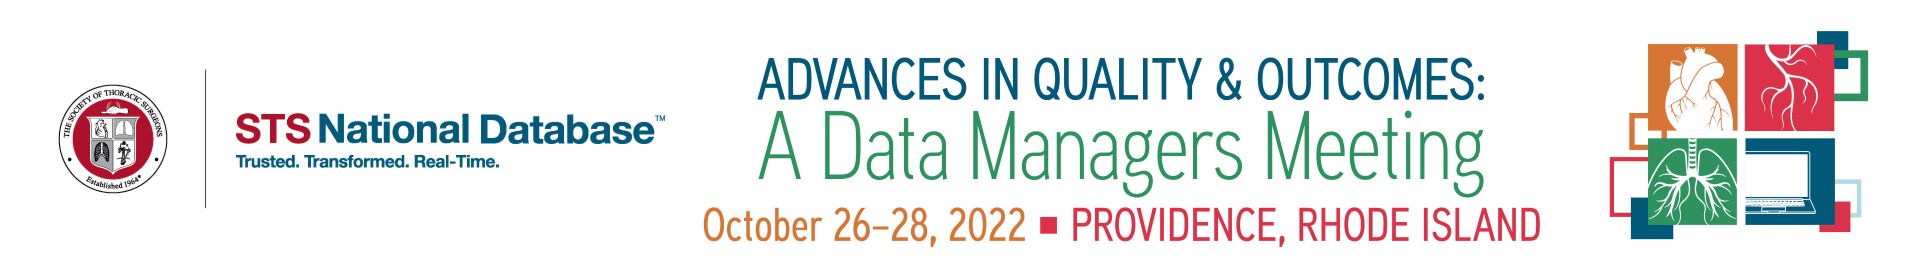 2022 Advances in Quality & Outcomes: A Data Managers Meeting Event Banner